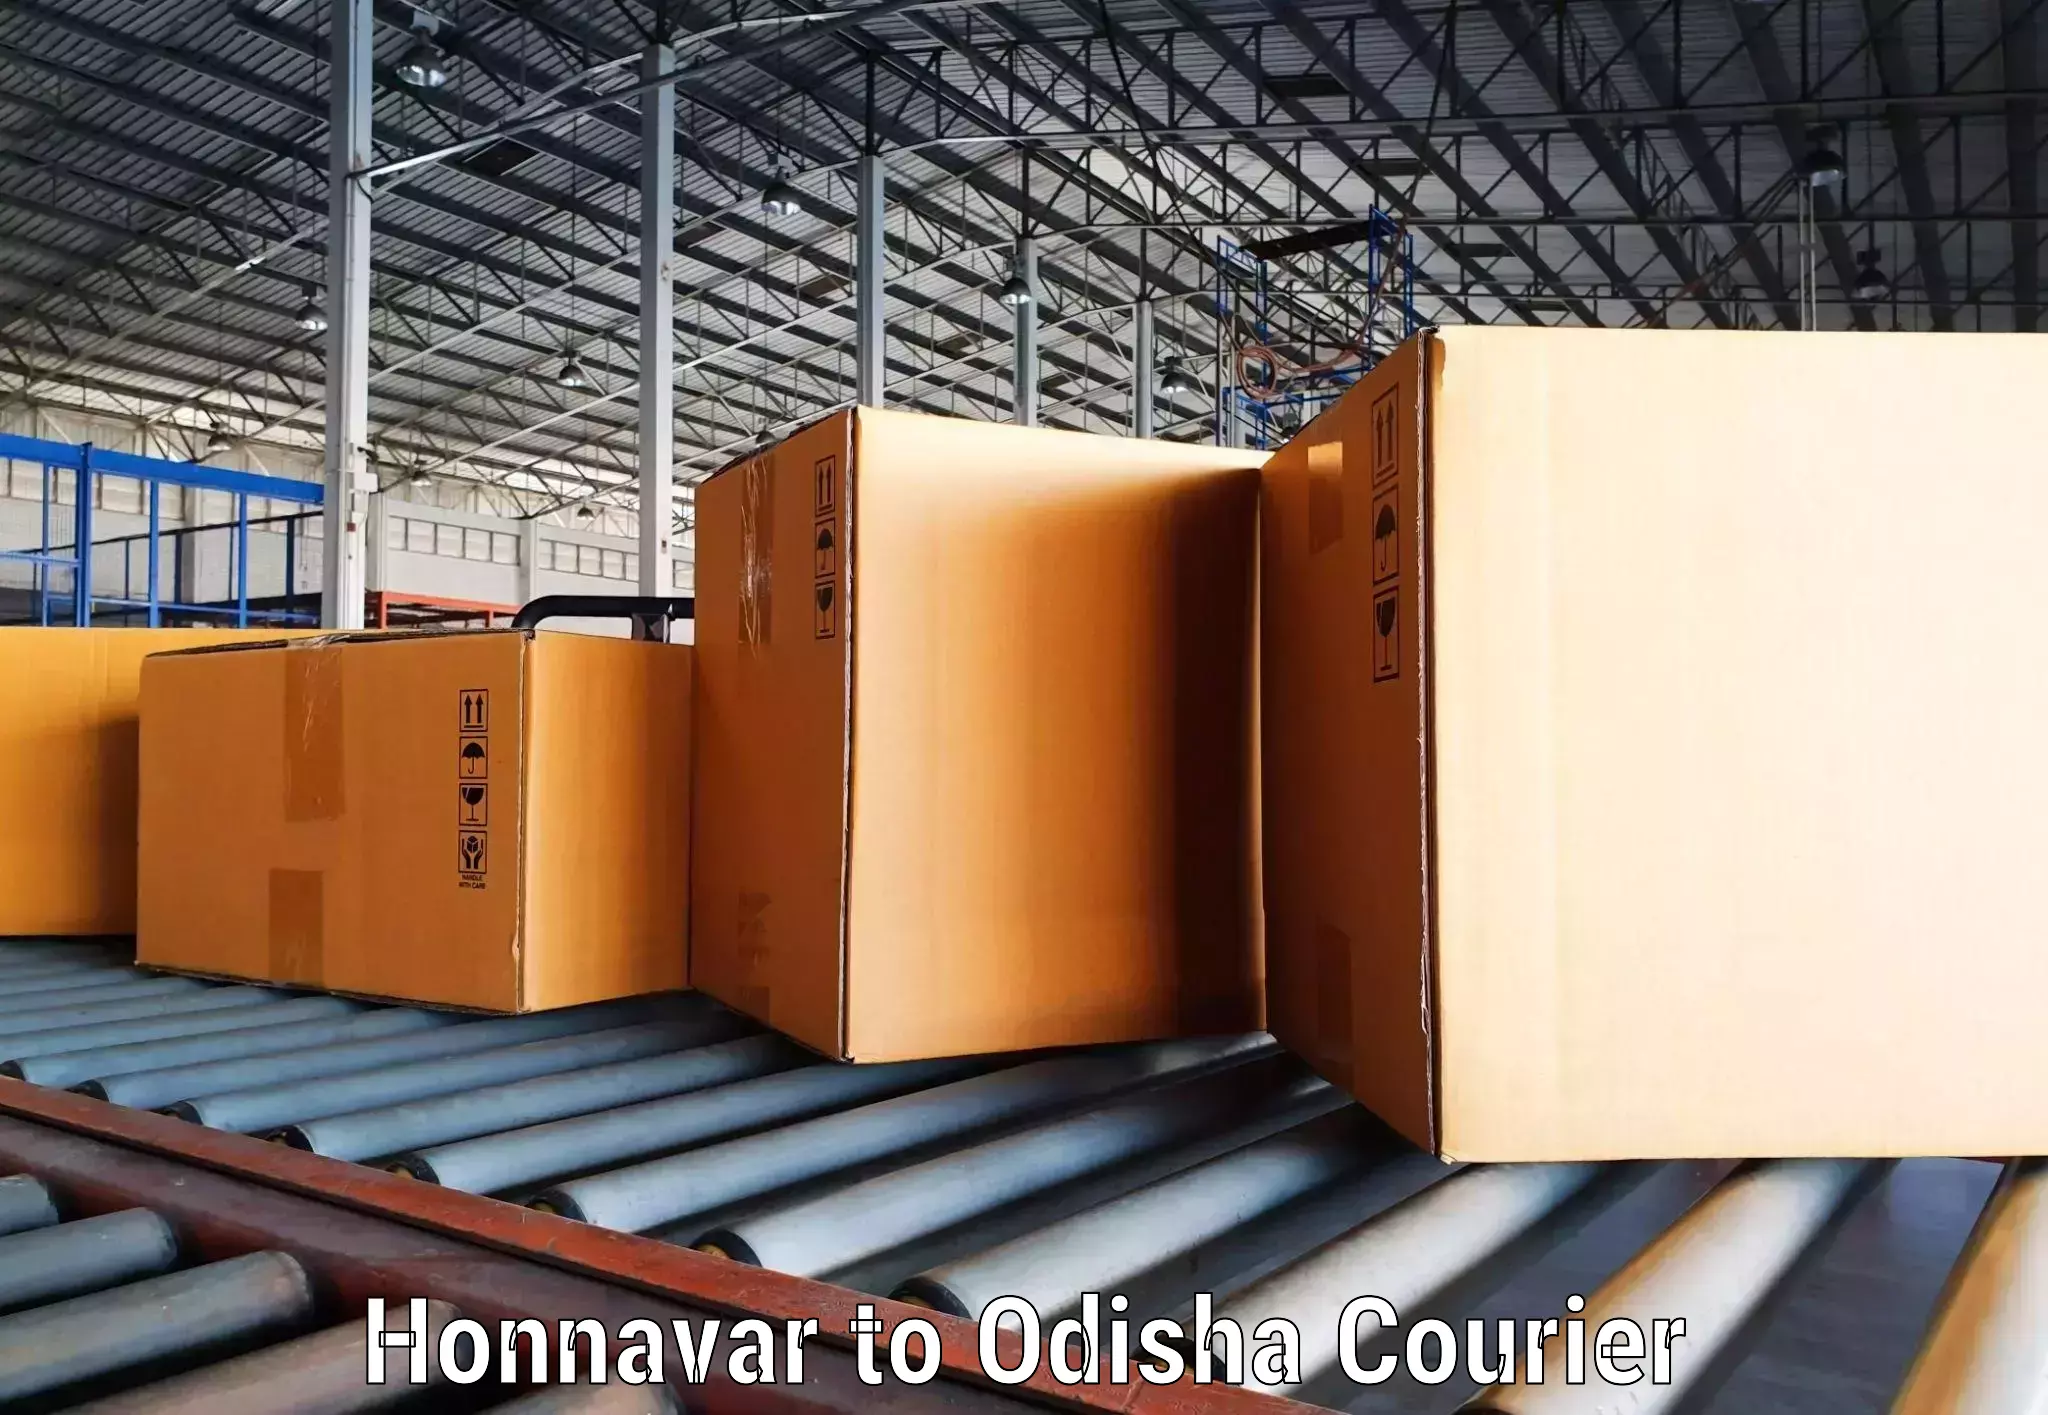 State-of-the-art courier technology Honnavar to Chandipur